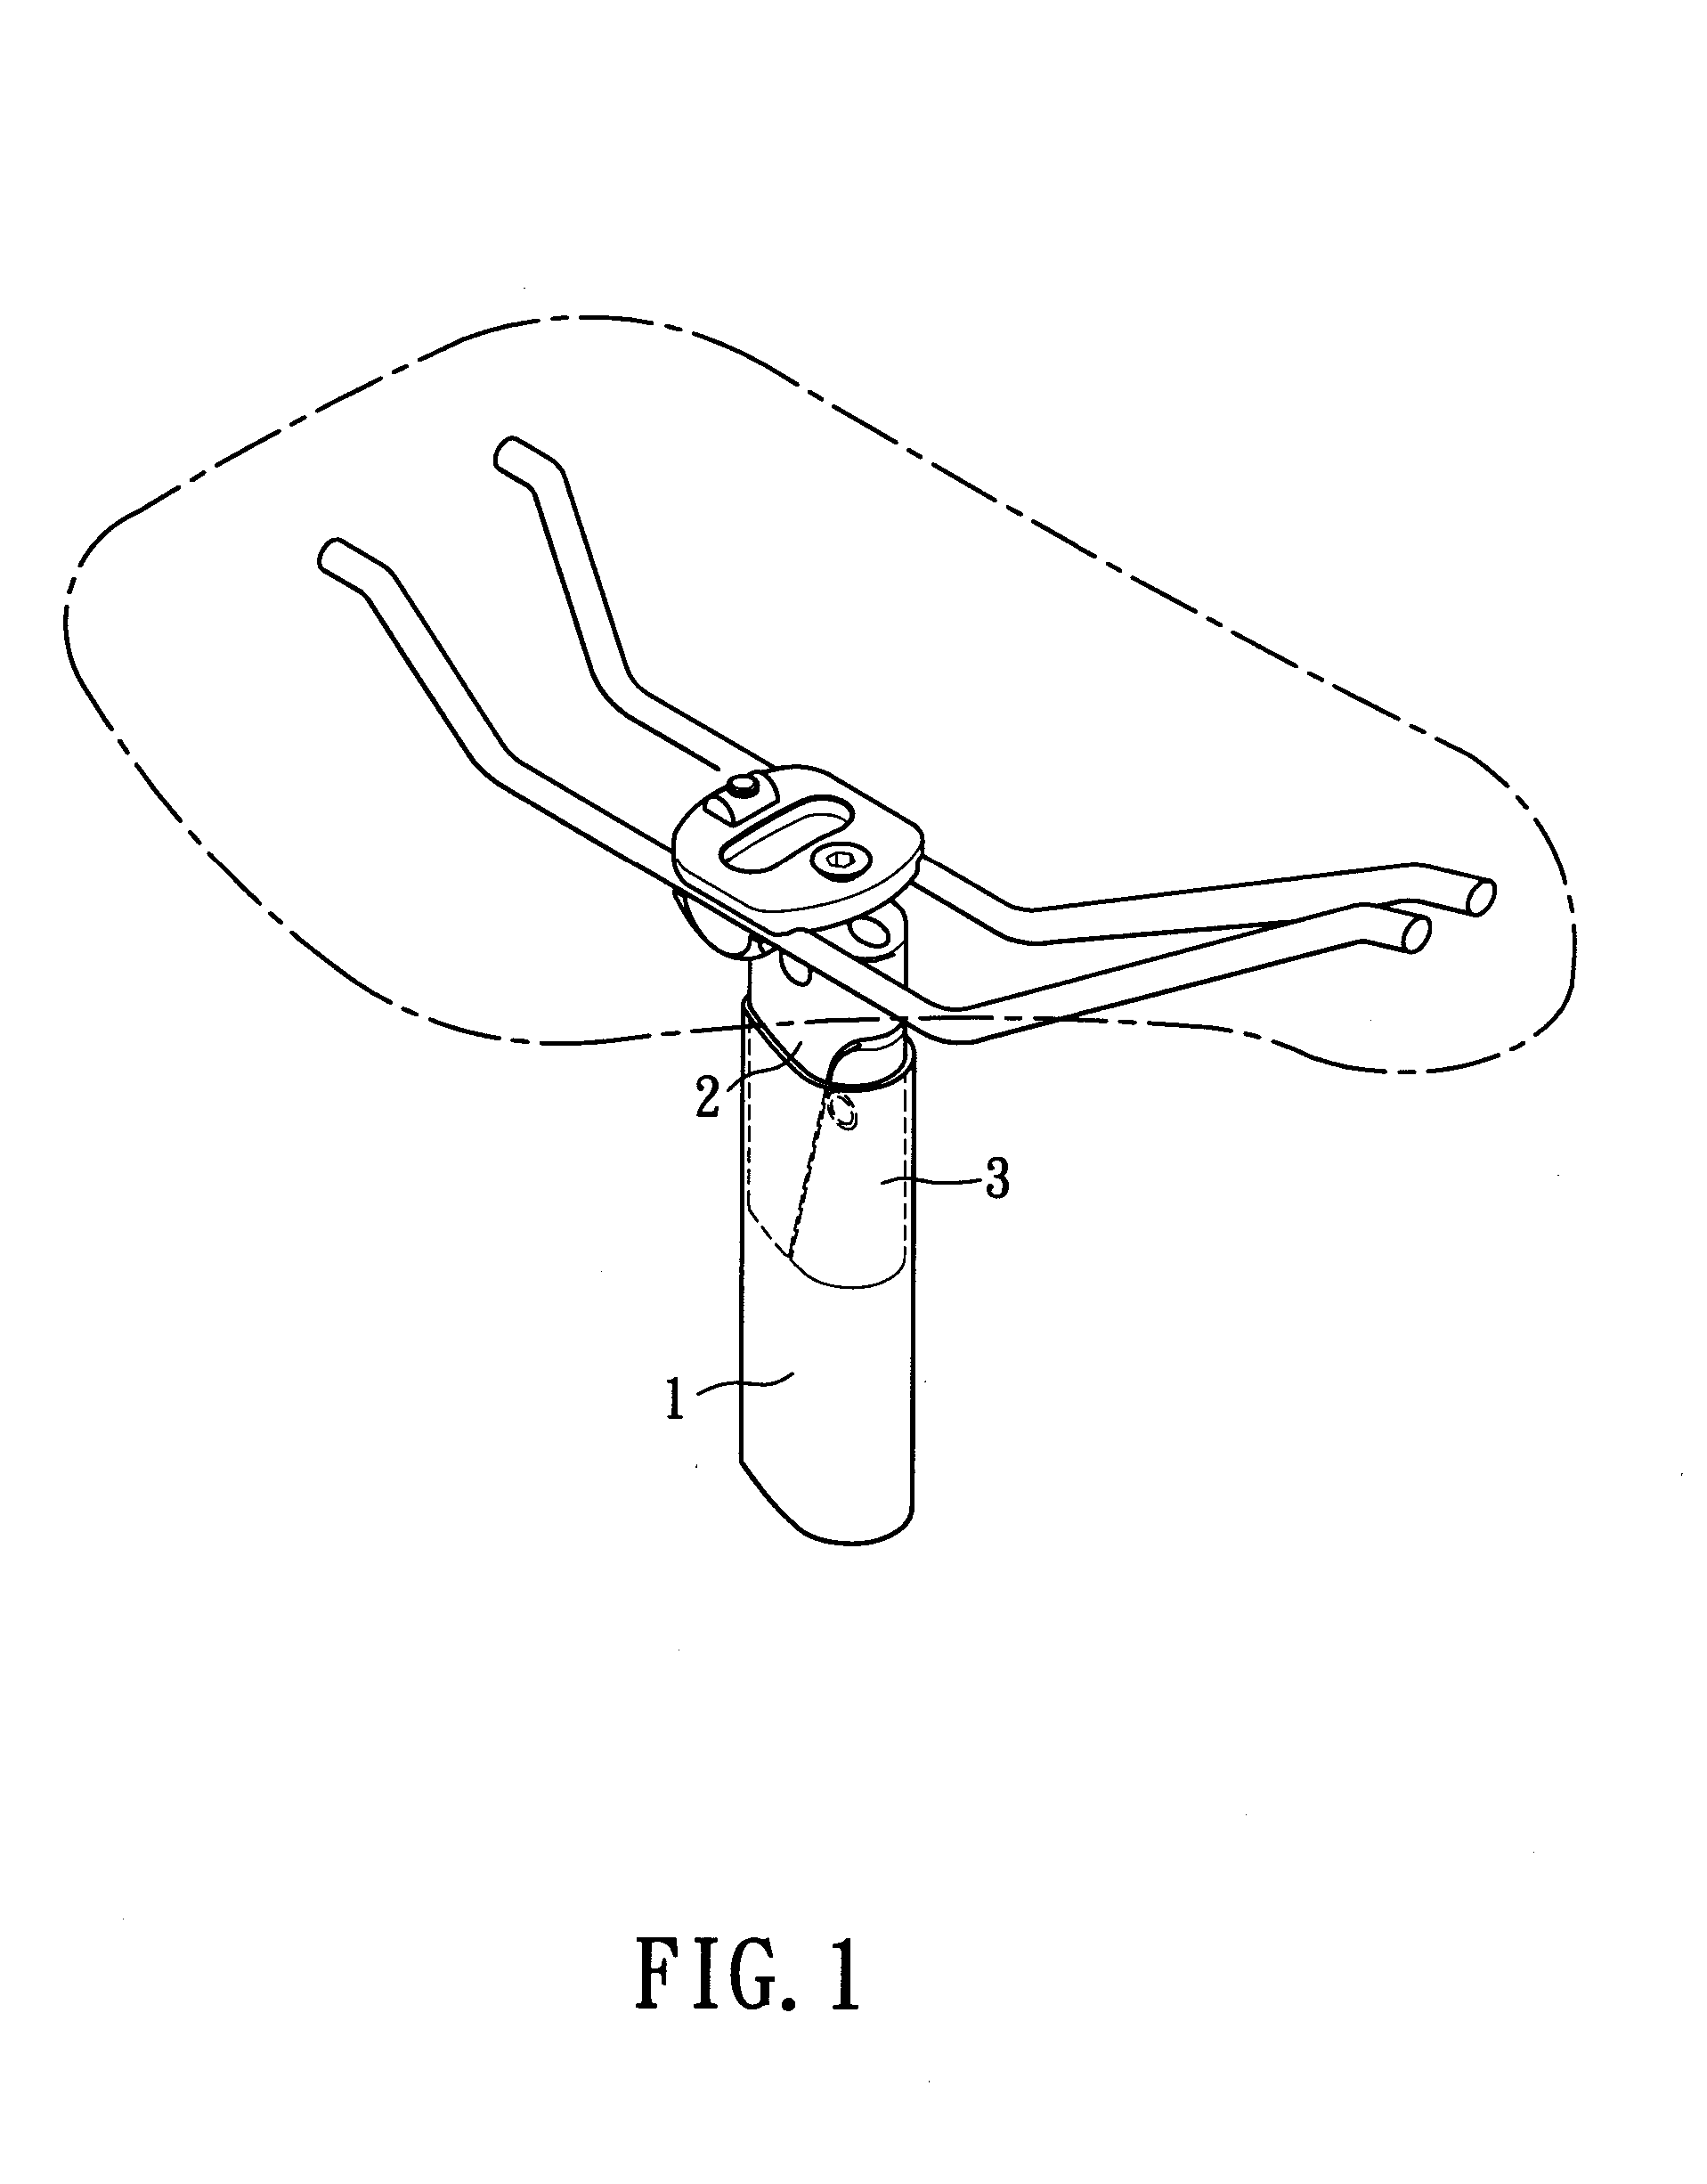 Seat support structure of a bicycle